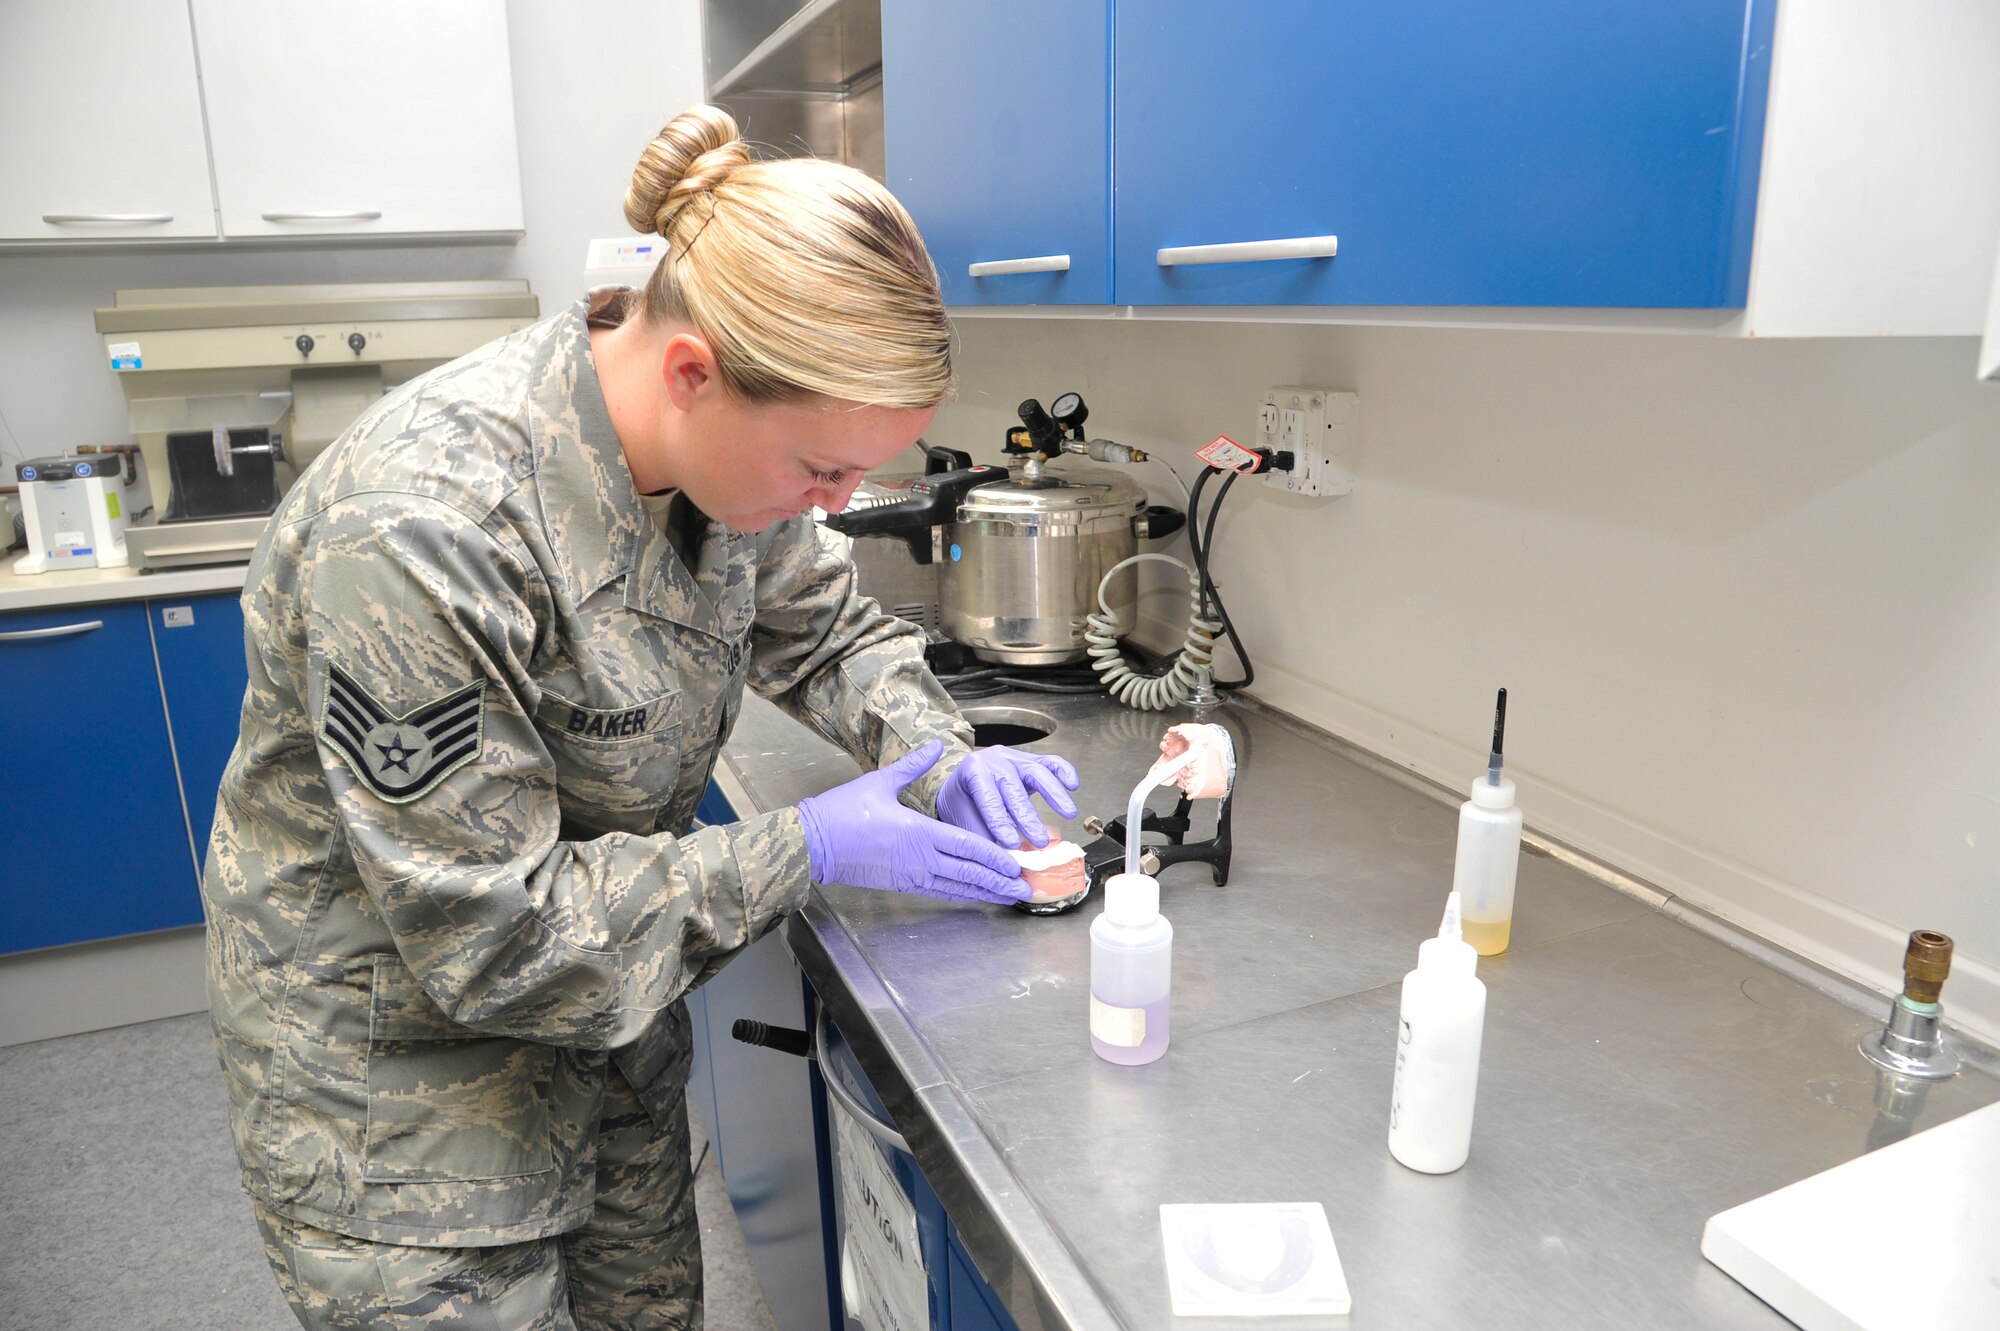 Staff Sgt. Maddie Baker, 56th Dental Squadron Dental Laboratory technician, carefully molds acrylic around a cast in the dental lab at Luke Air Force Base. The Airmen at the dental lab are responsible for fabricating crowns, retainers, sports guards, implants and more. (U.S. Air Force photo/Senior Airman Grace Lee)